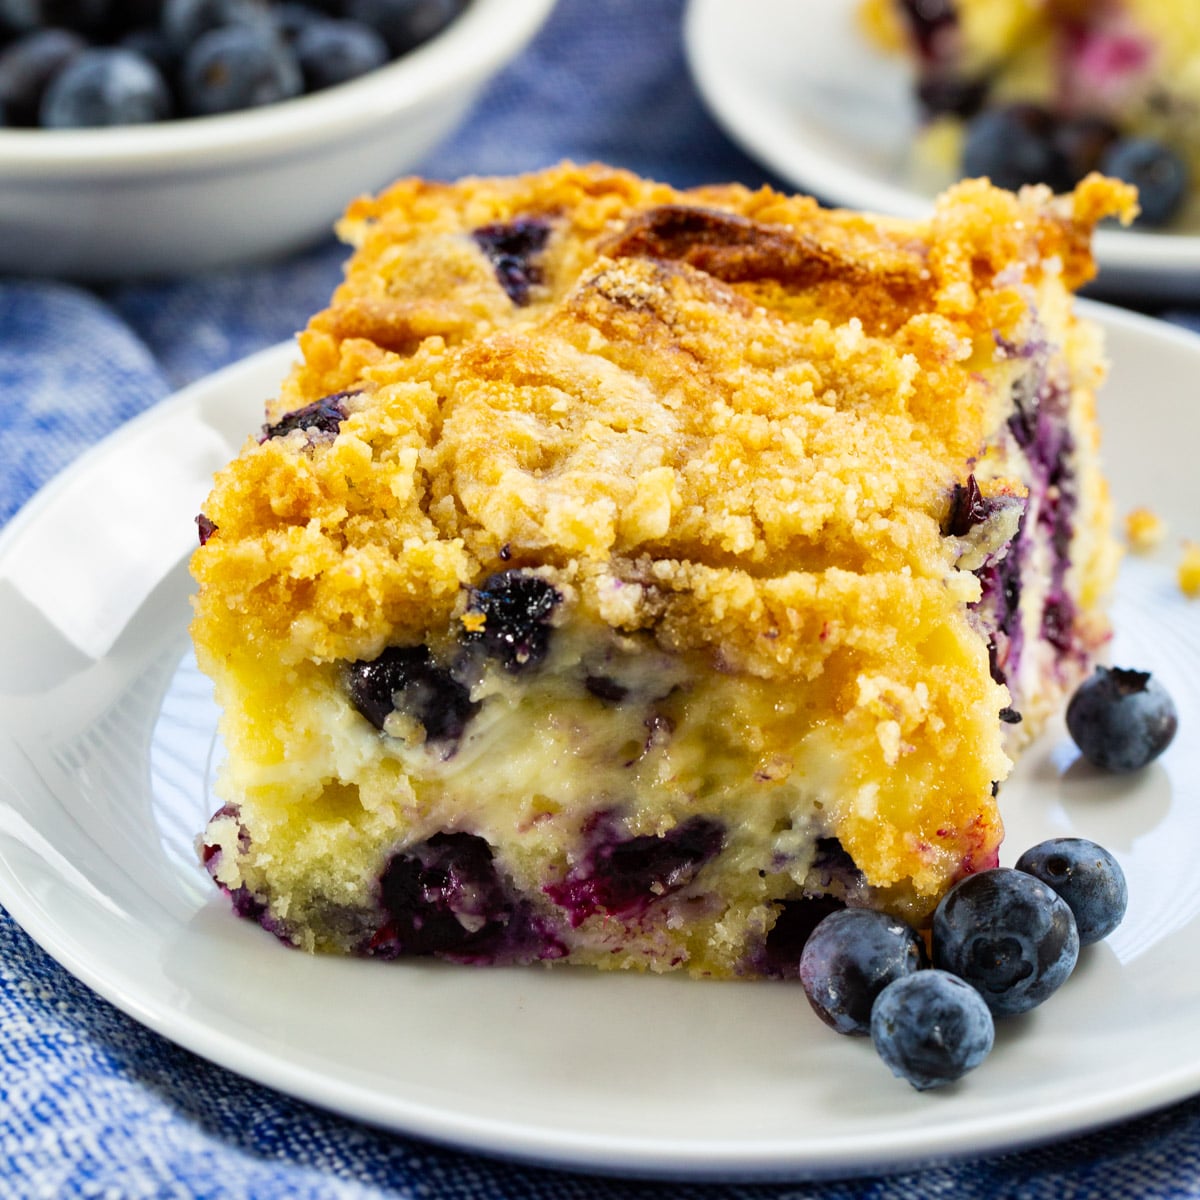 Slice of Blueberry Cream Cheese Coffee Cake on a plate.